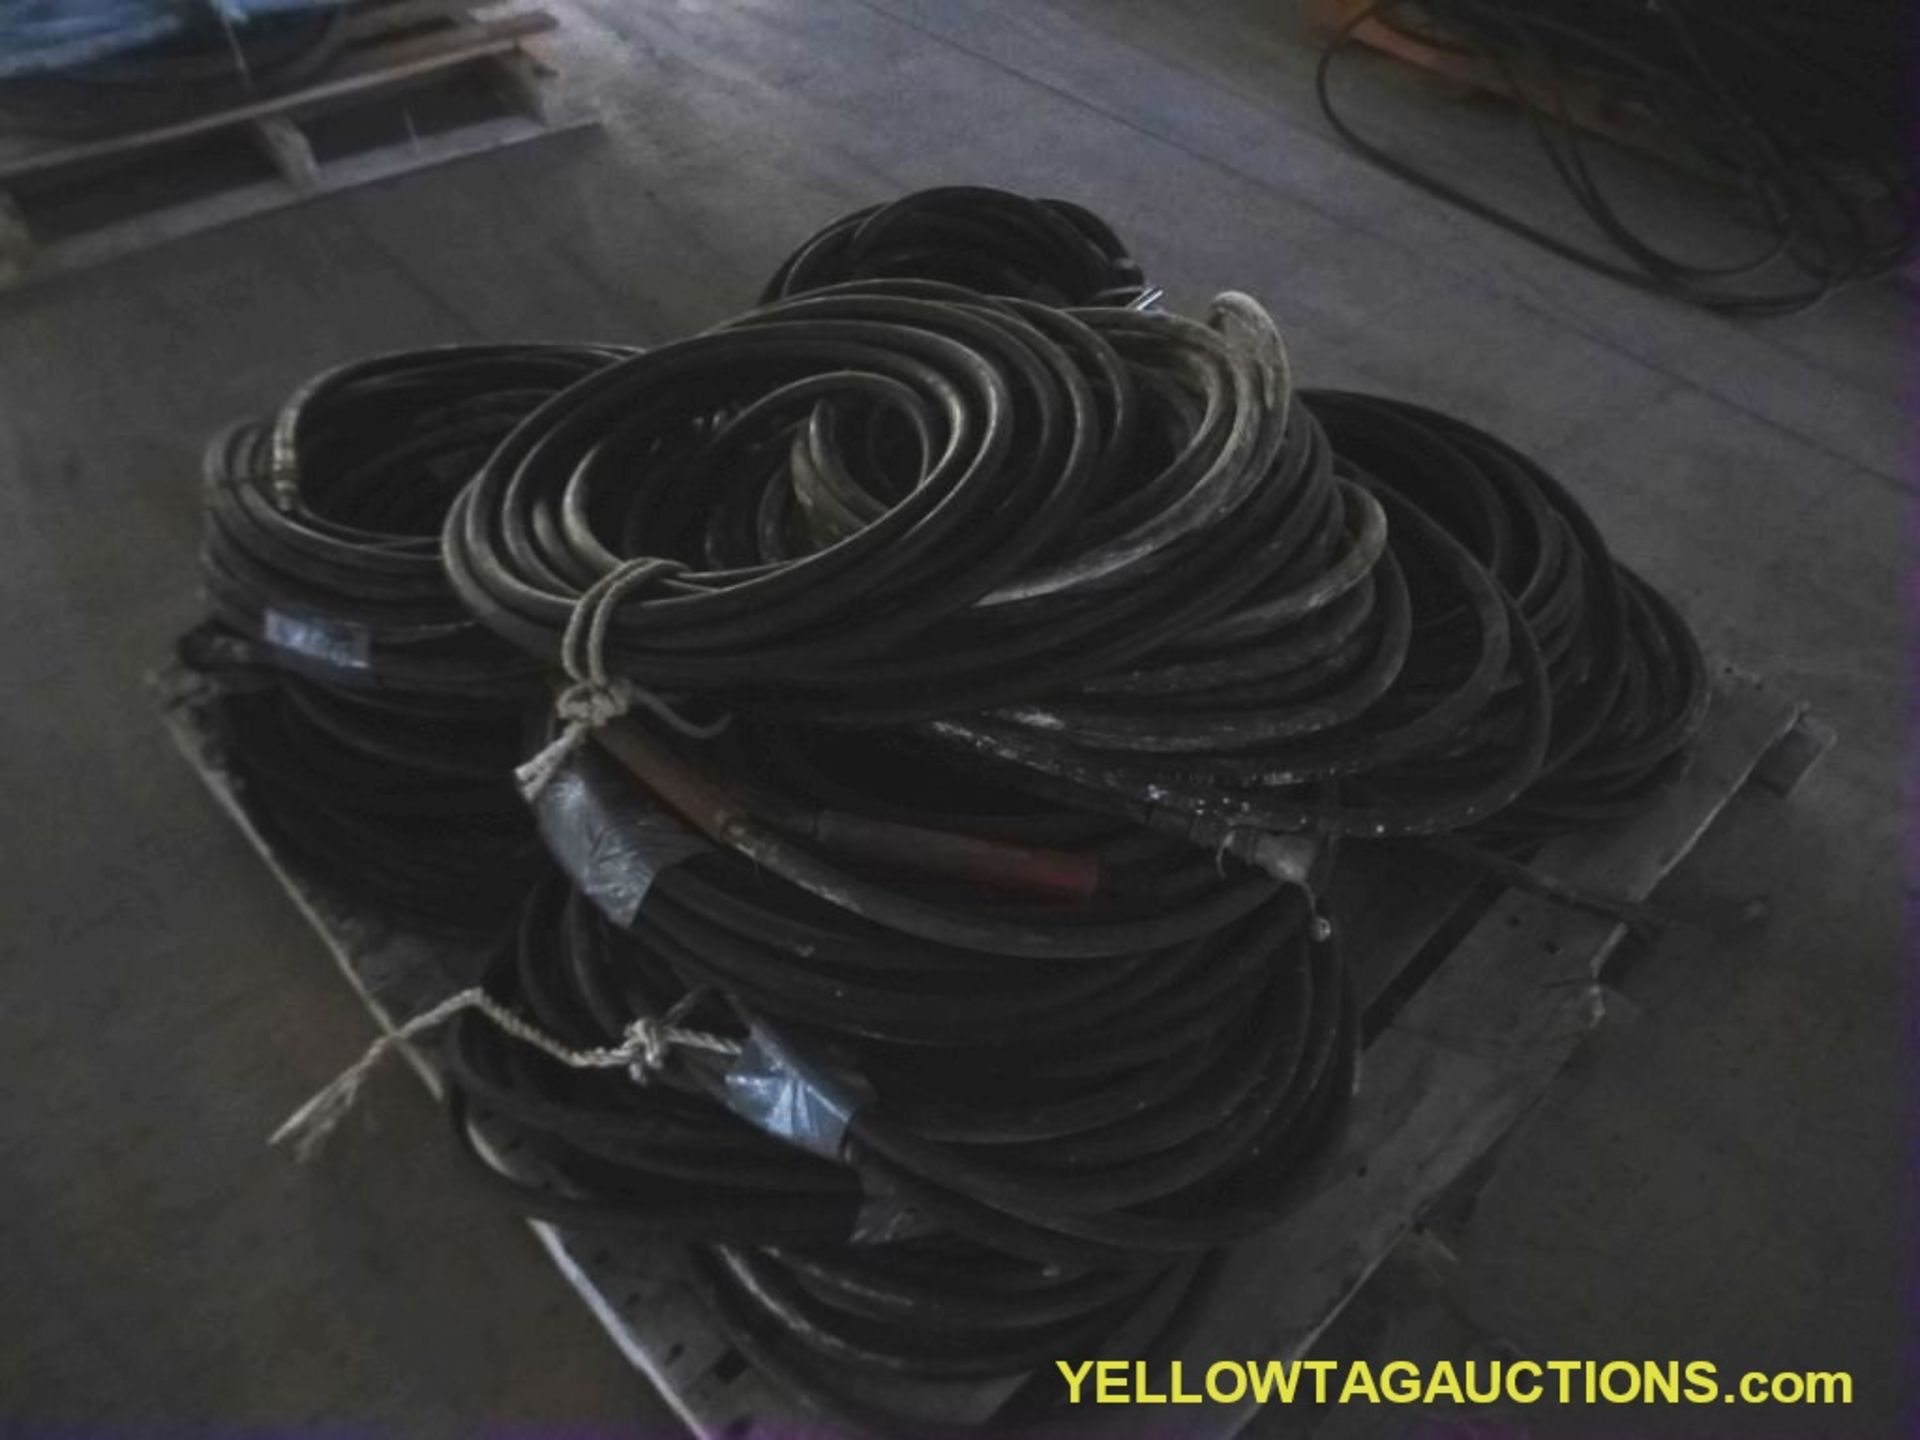 Lot of Assorted Hoses